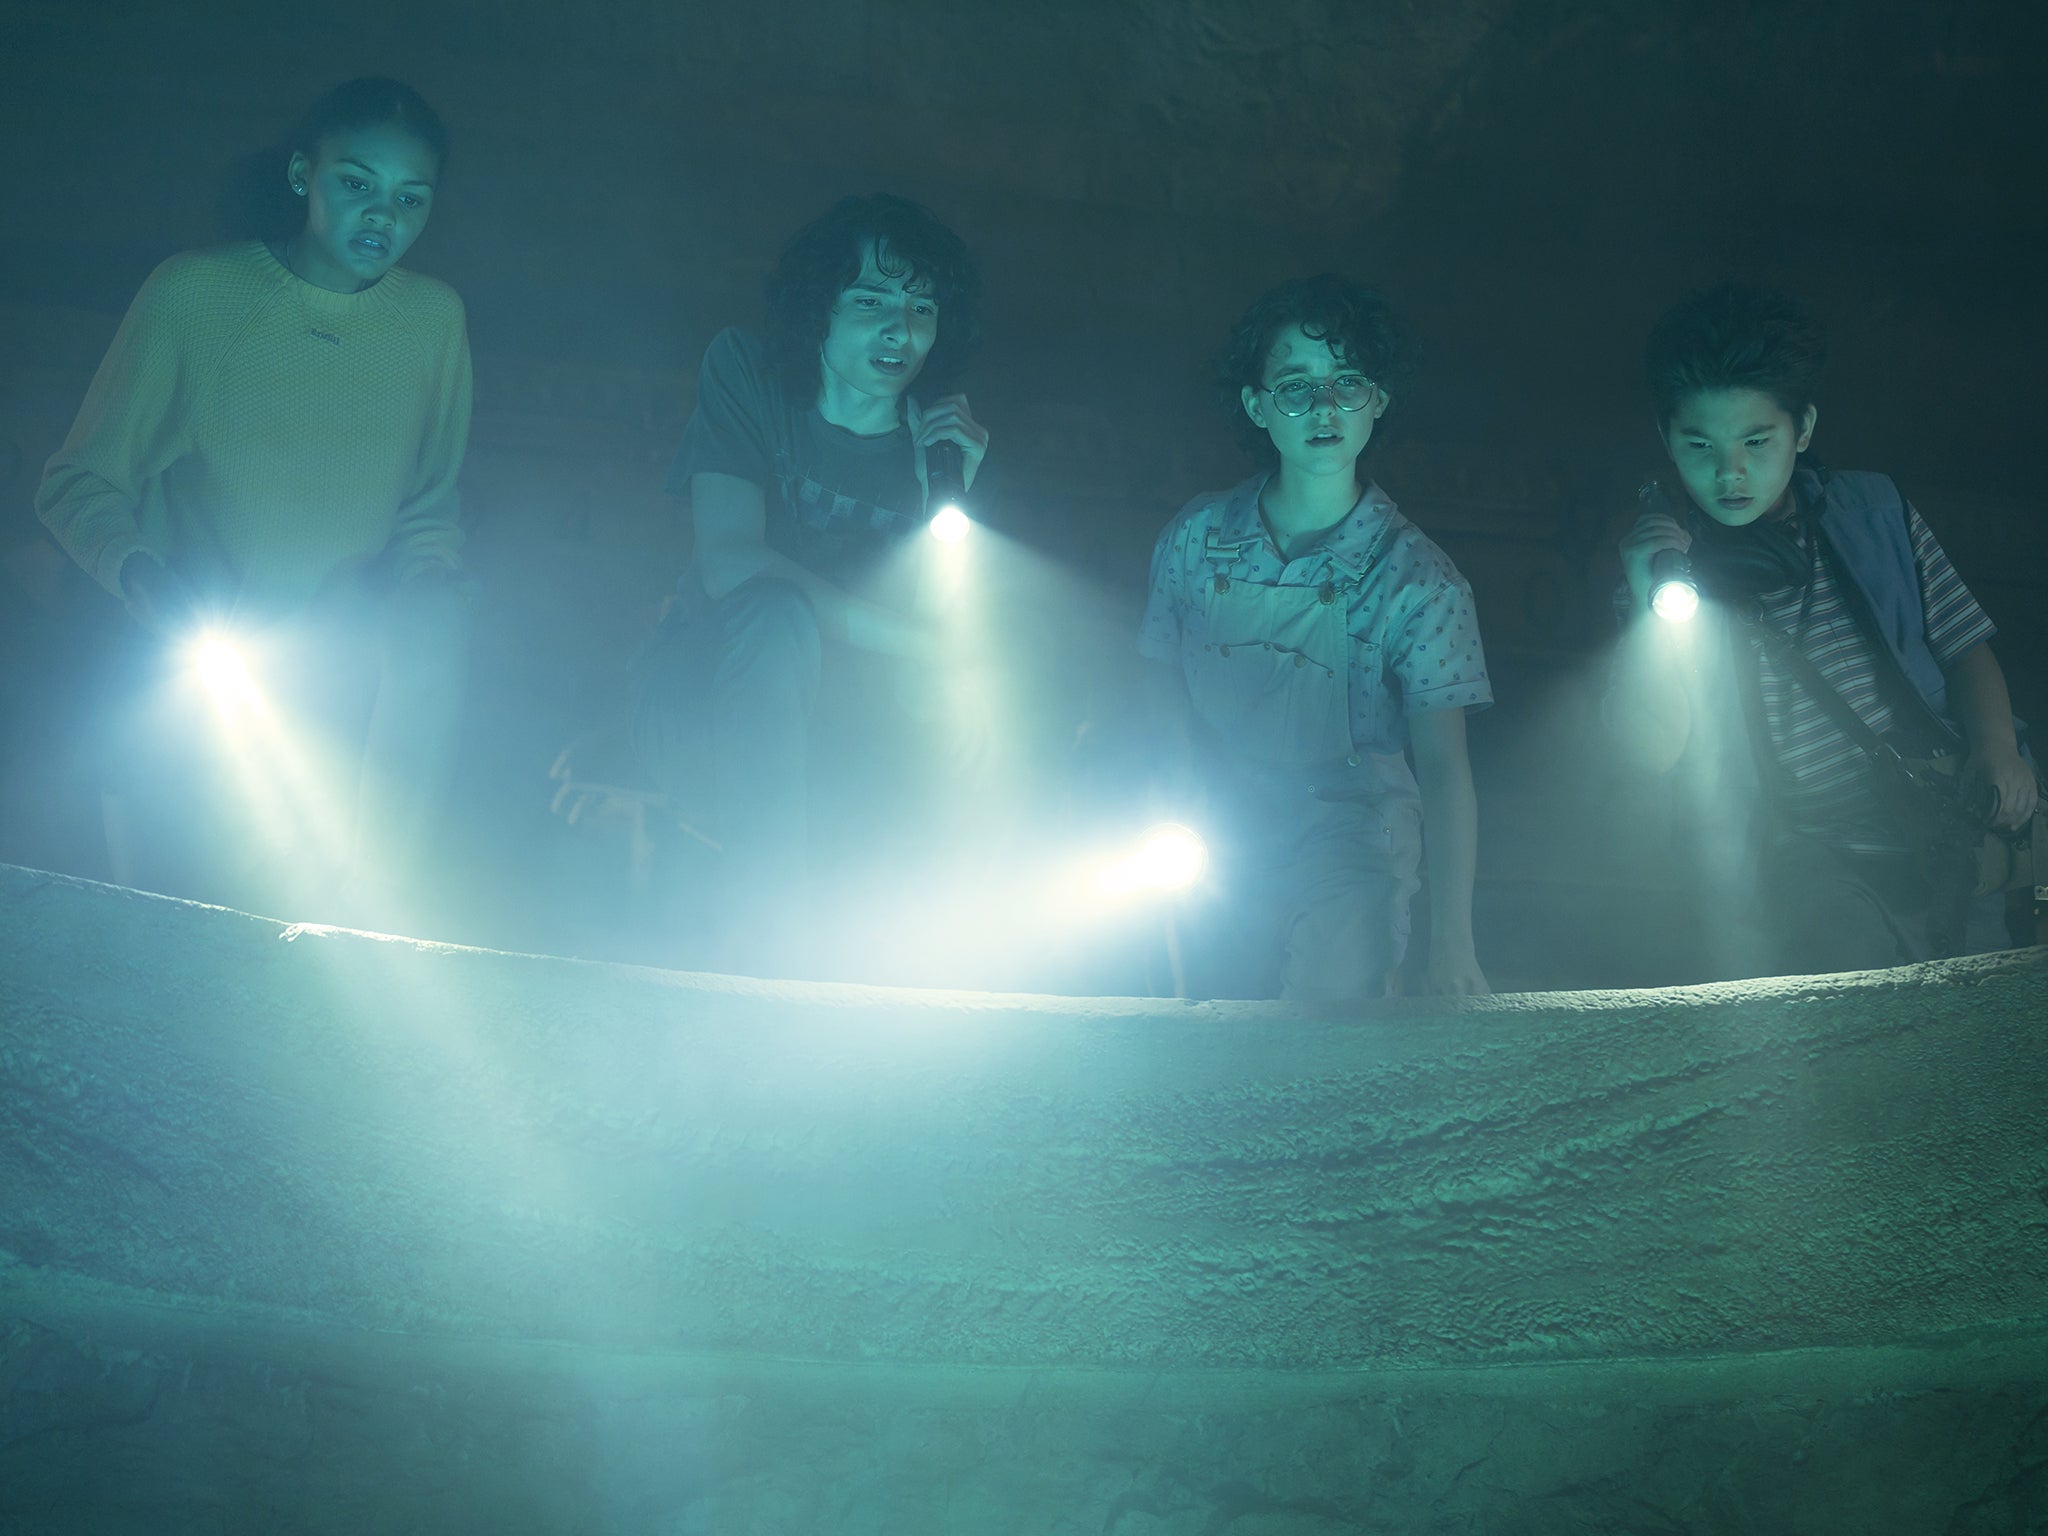 Celeste O’Connor (Lucky), Finn Wolfhard (Trevor), Mckenna Grace (Phoebe) and Logan Kim (Podcast) in ‘Ghostbusters: Afterlife’